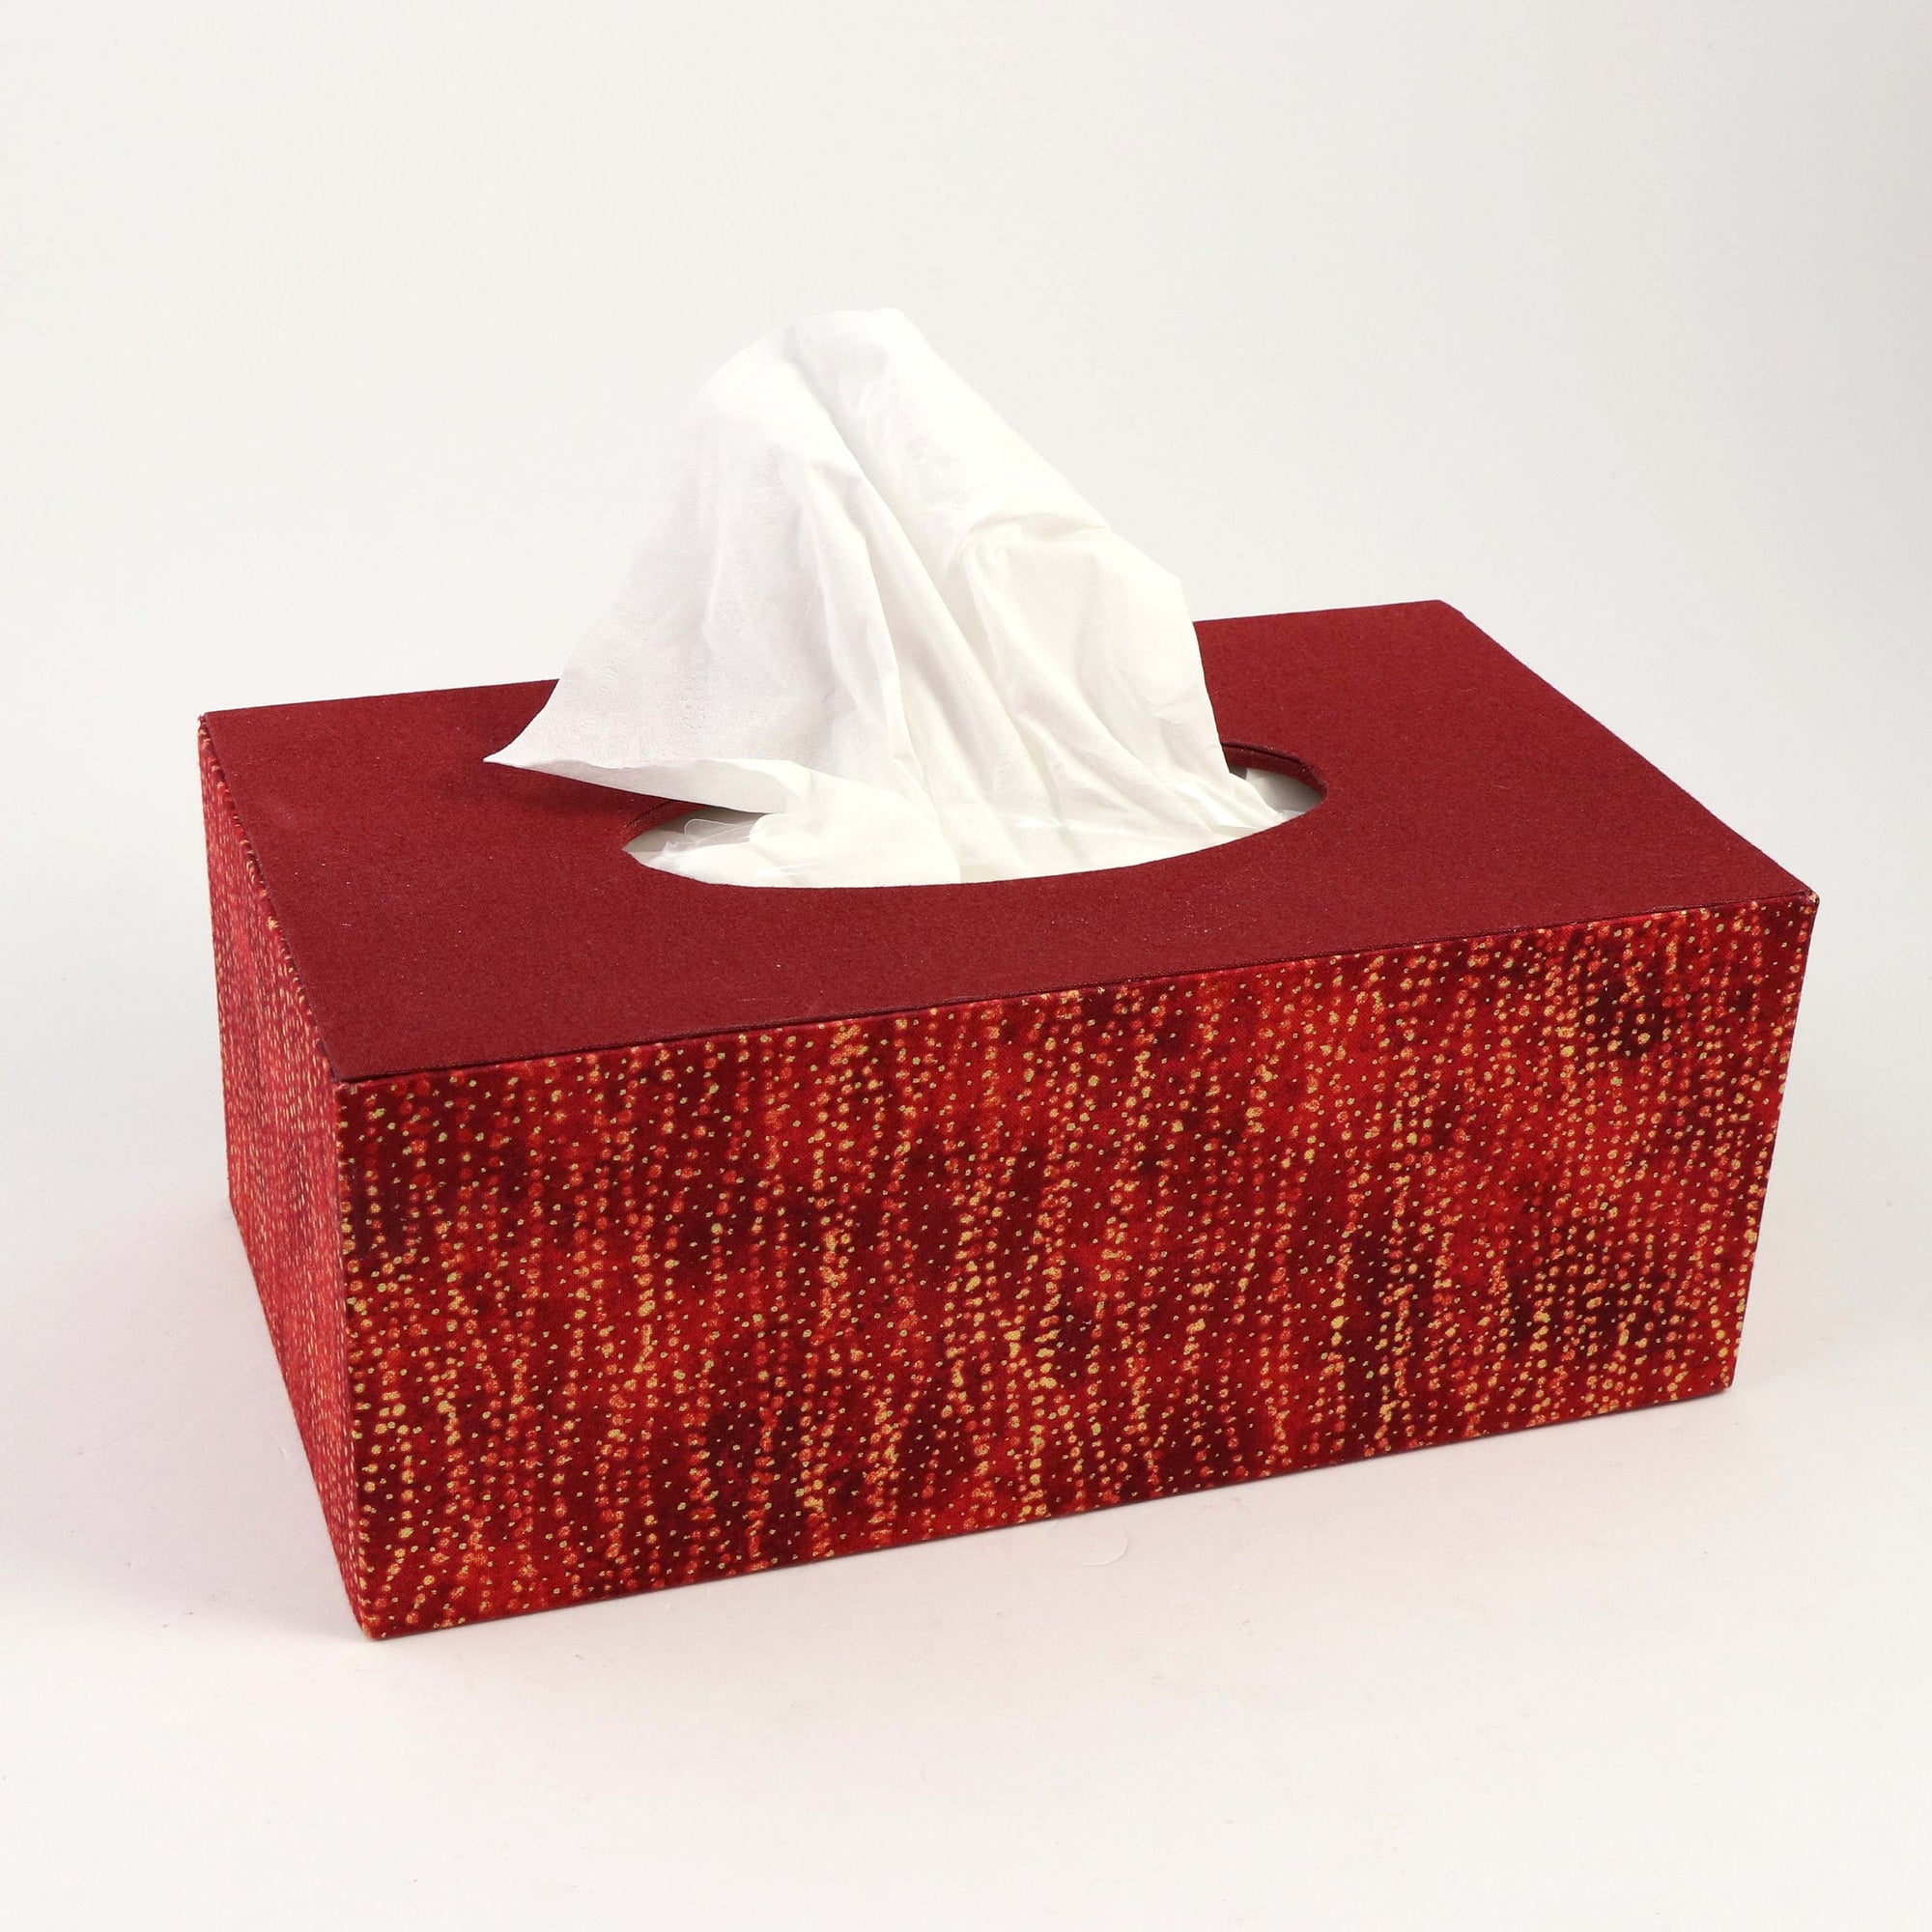 Fabric rectangular tissue box cover DIY kit, cartonnage kit 181, online  instructions included